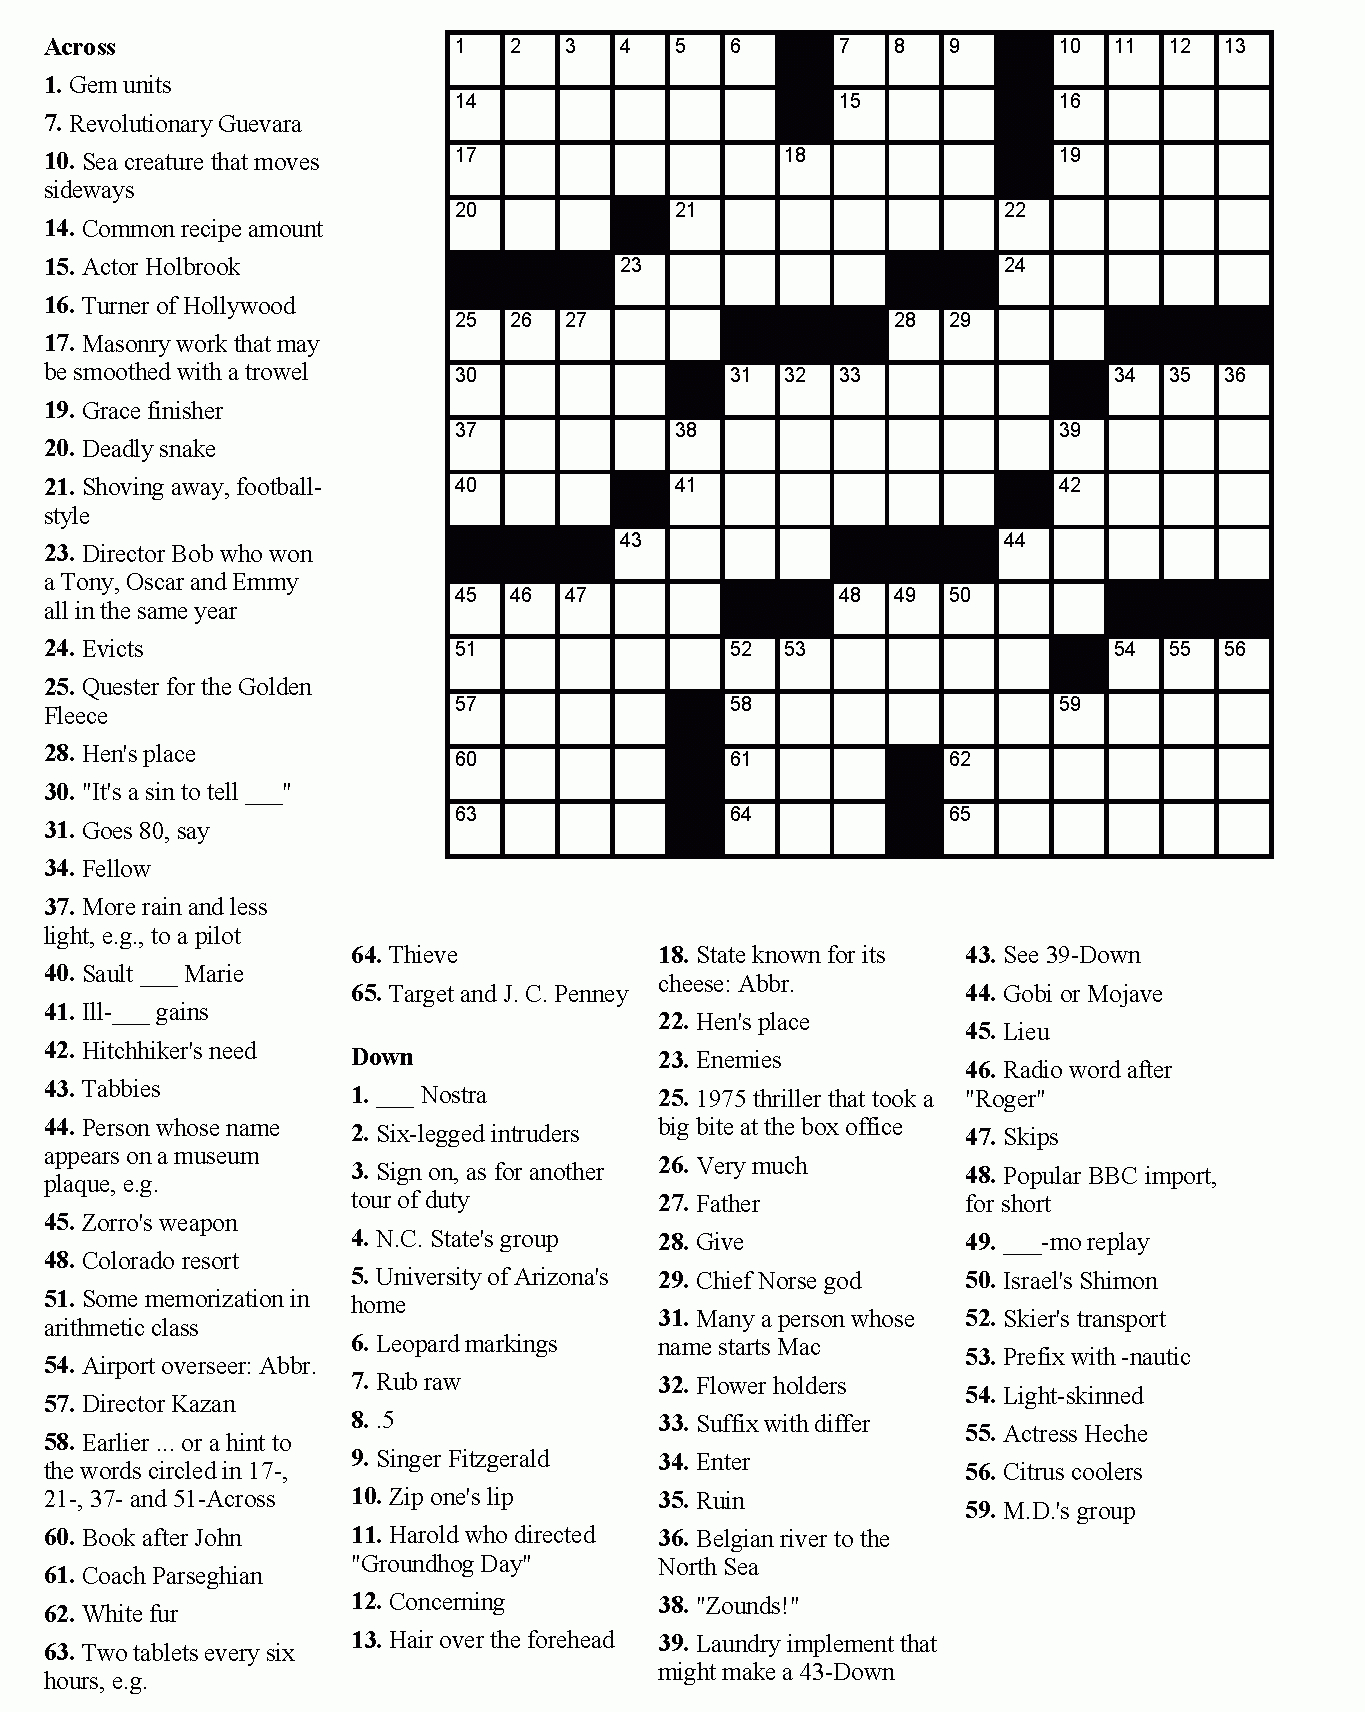 Free Printable Crossword Puzzles Easy For Adults | My Board - Free - Printable Crossword Puzzles Medium With Answers